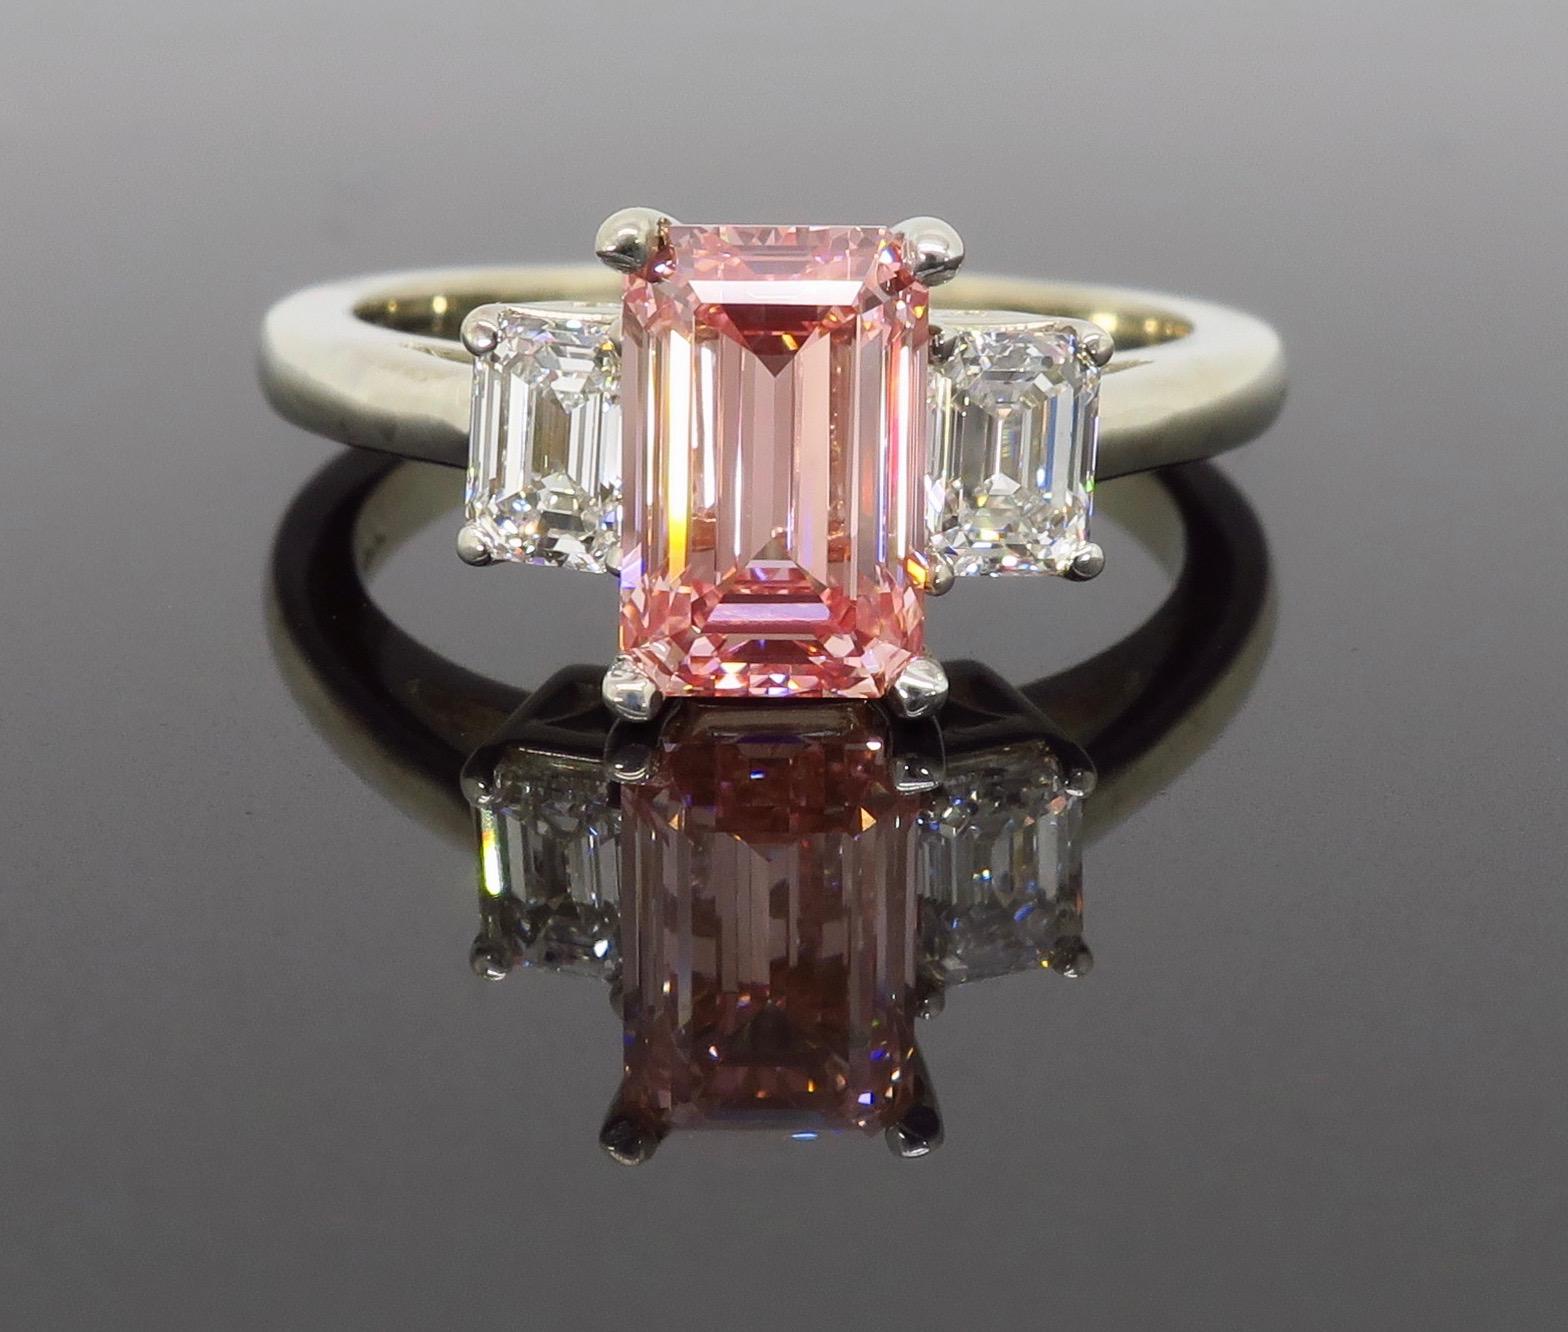 GIA Certified pink and white emerald cut diamond three stone ring crafted in 14k white gold.

GIA Certified: 2185945499
*Copy of electronic certification only*
The diamond is laser inscribed “TREATED COLOR